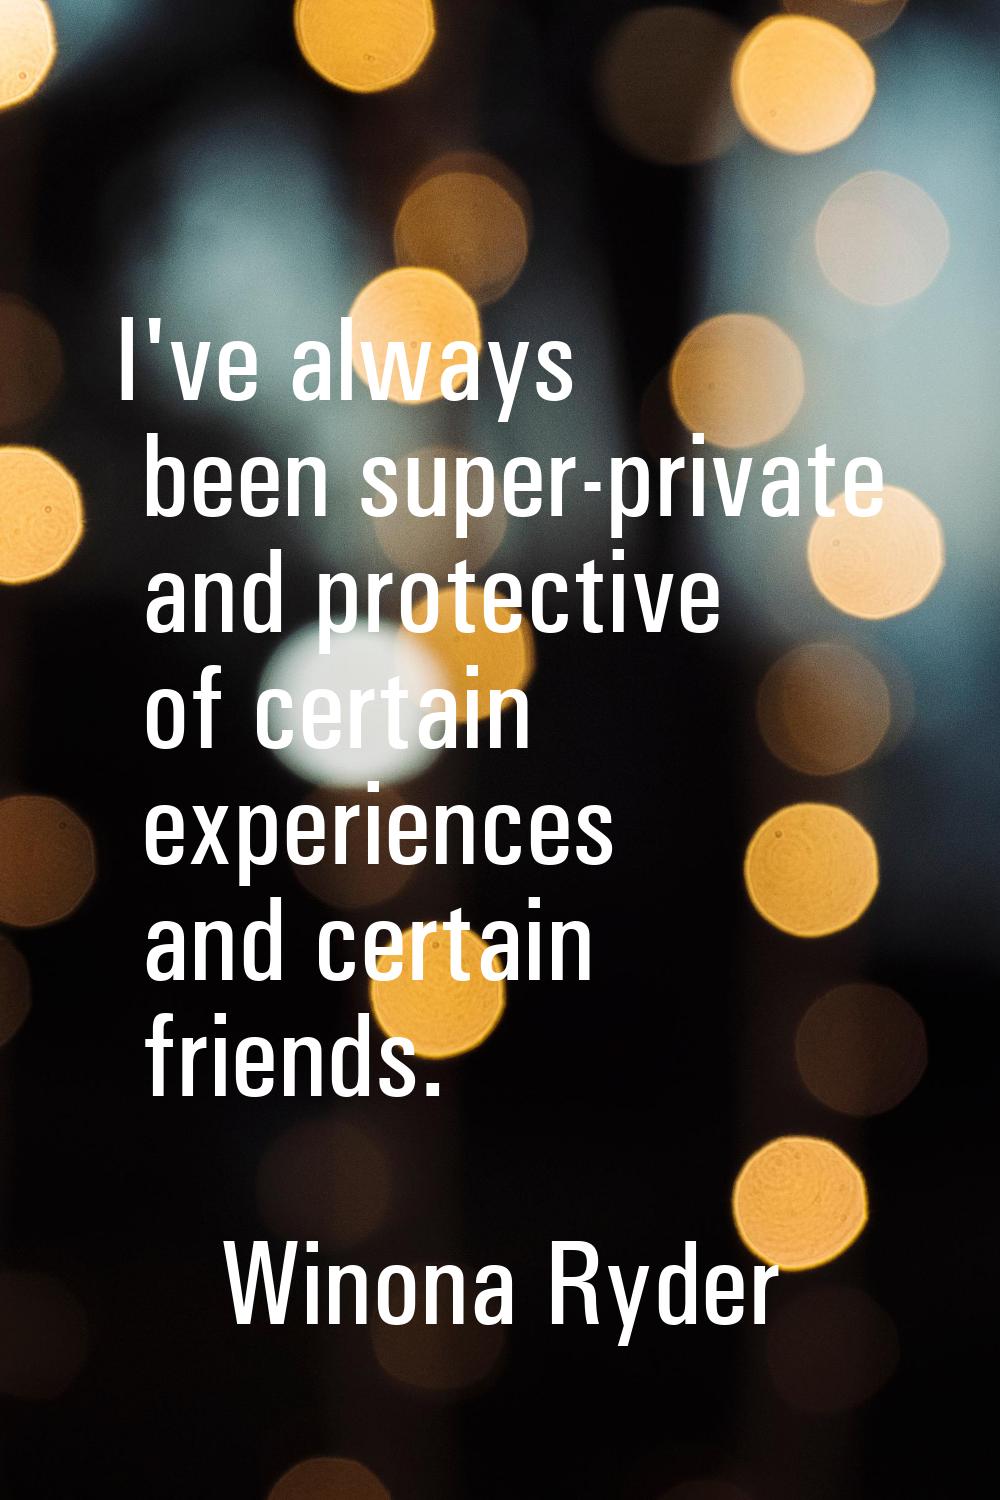 I've always been super-private and protective of certain experiences and certain friends.